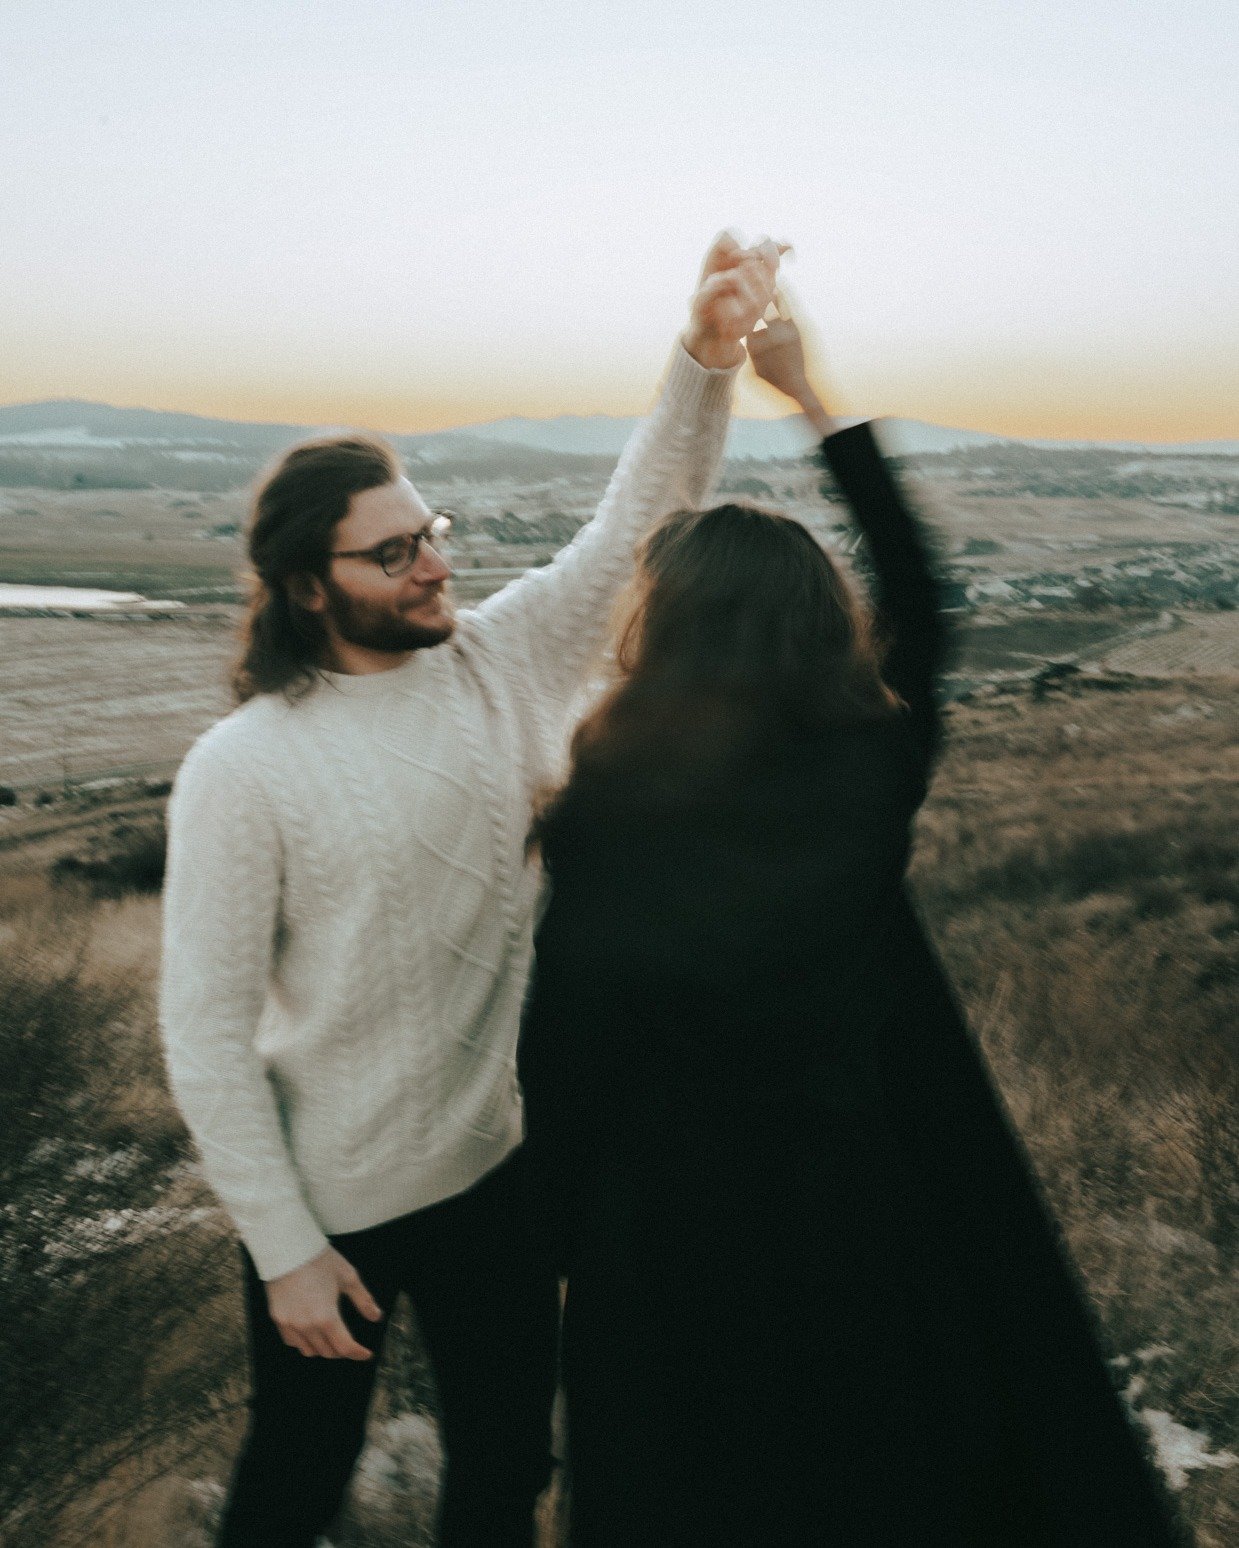 Should You Have an Engagement Photo Session?

If you&rsquo;re recently engaged, you may be debating taking engagement photos. But do you really need them?

I&rsquo;m personally a big advocate of engagement photos because I think this season is such a